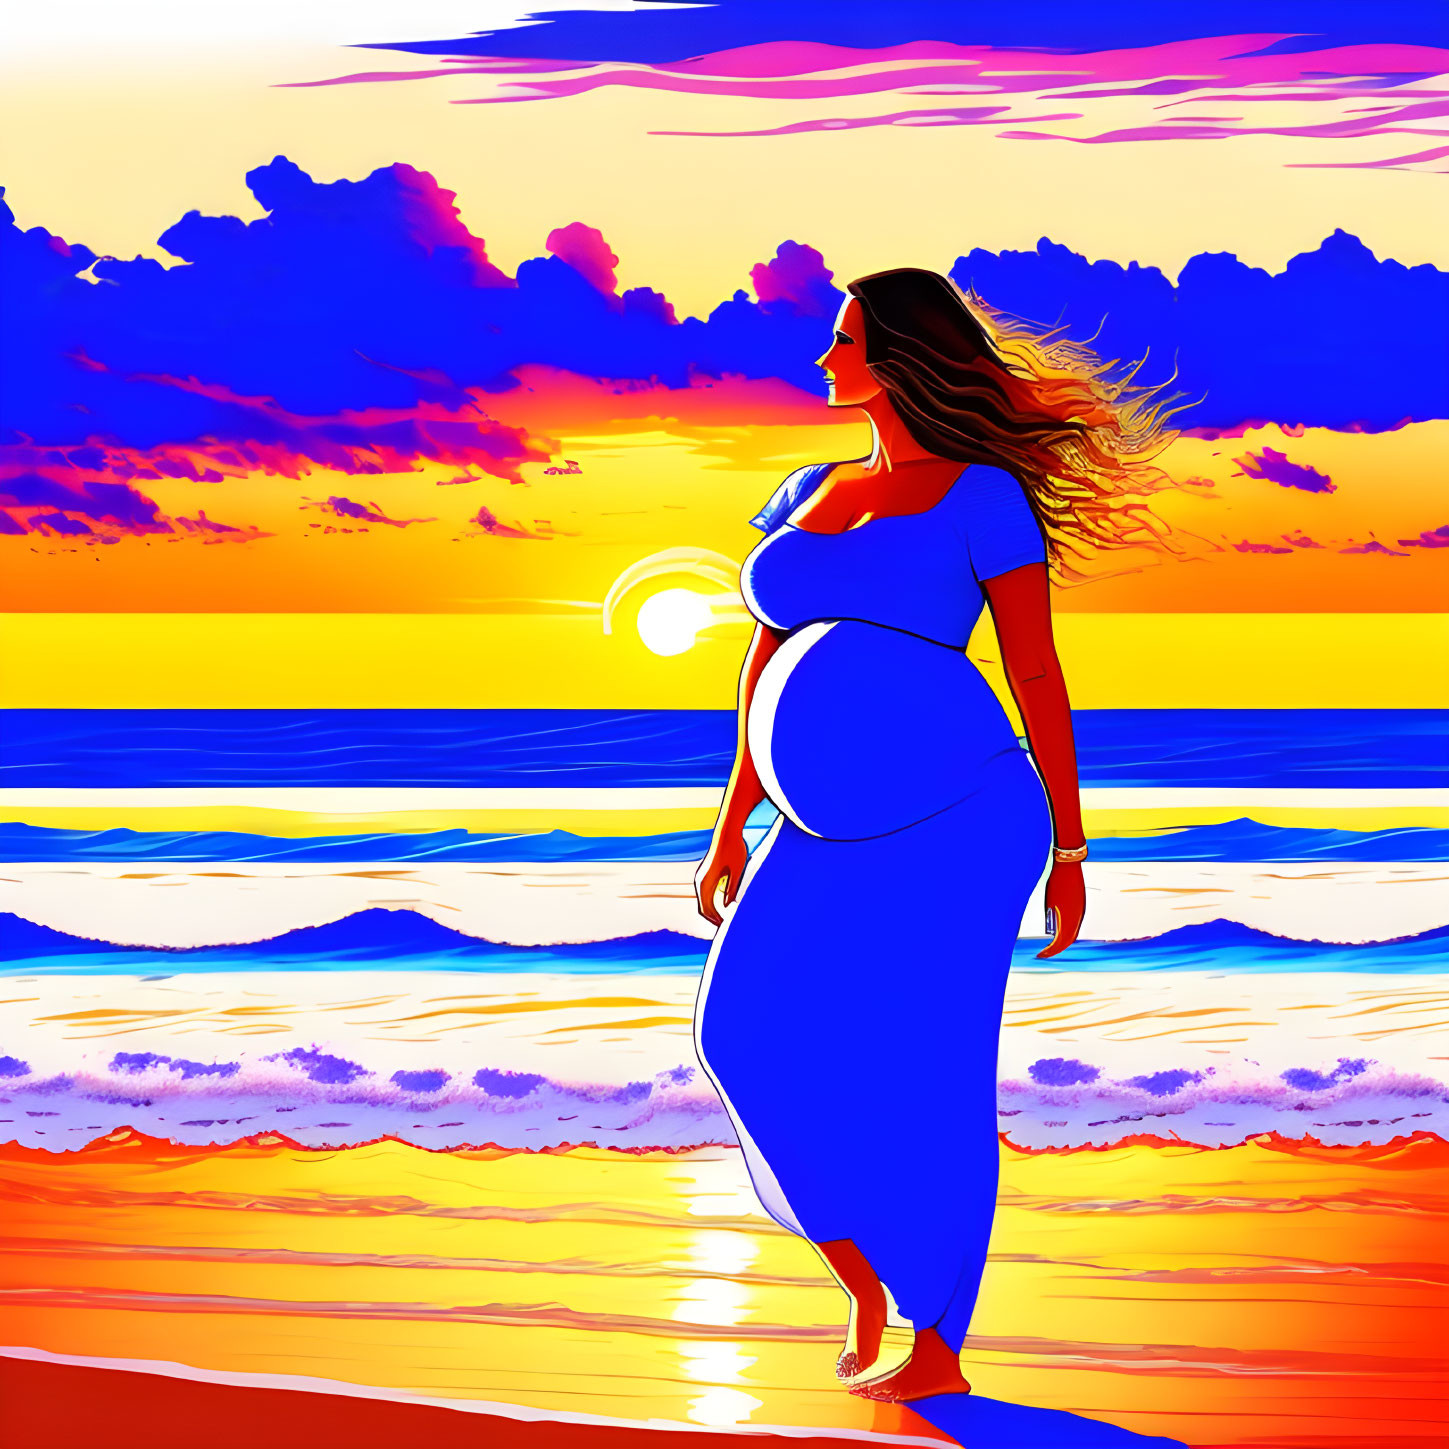 Pregnant woman in blue dress walking on shore at sunset